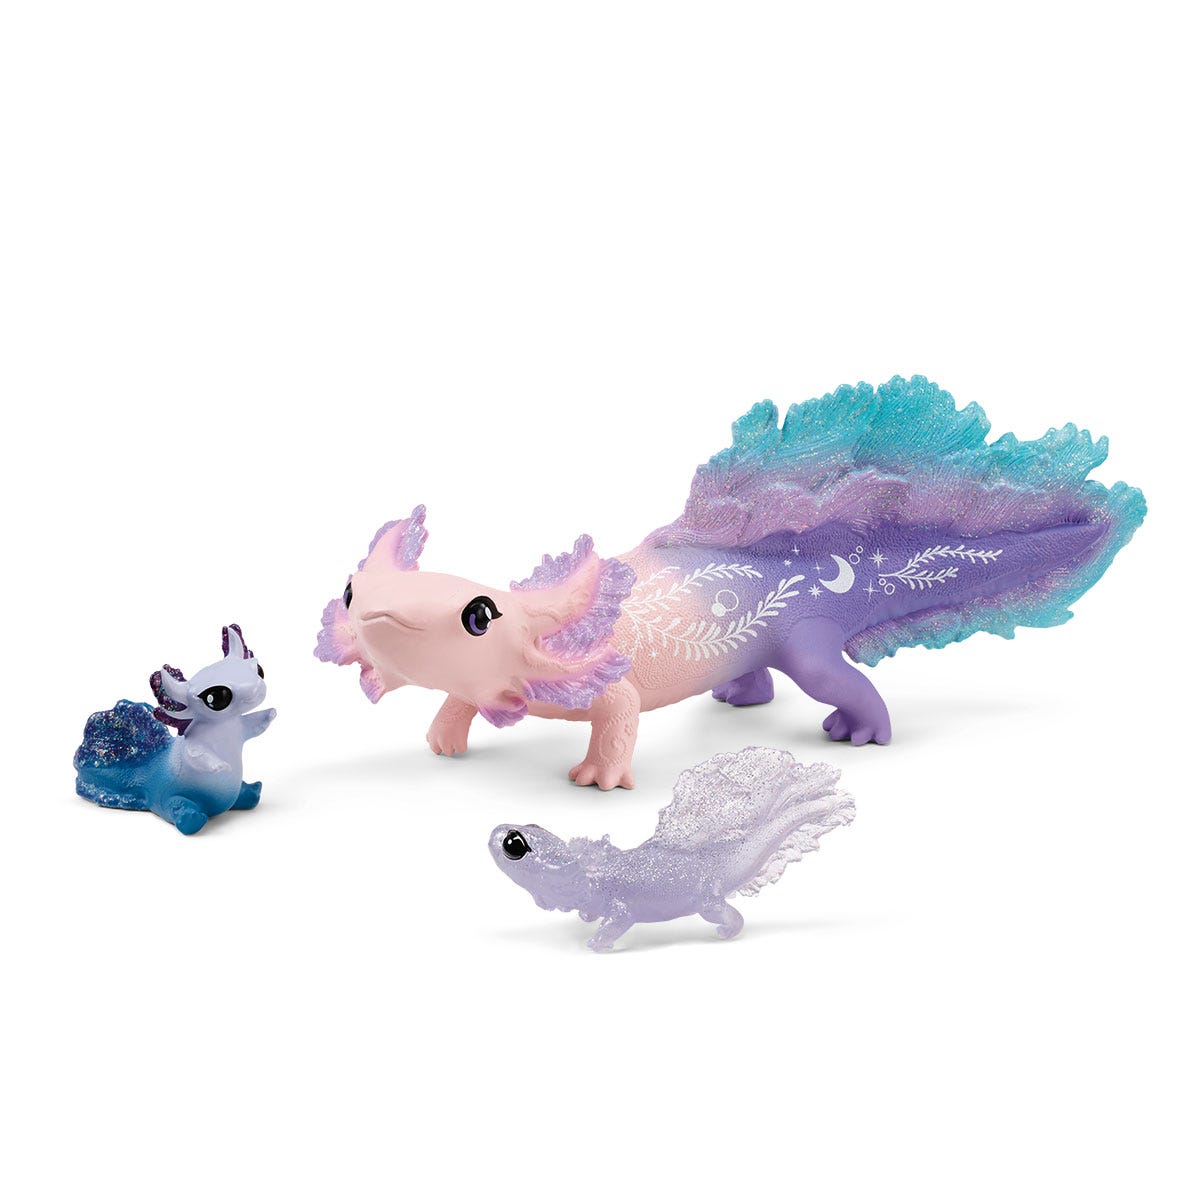 BAYALA® – the world of fairies and magical creatures | schleich®